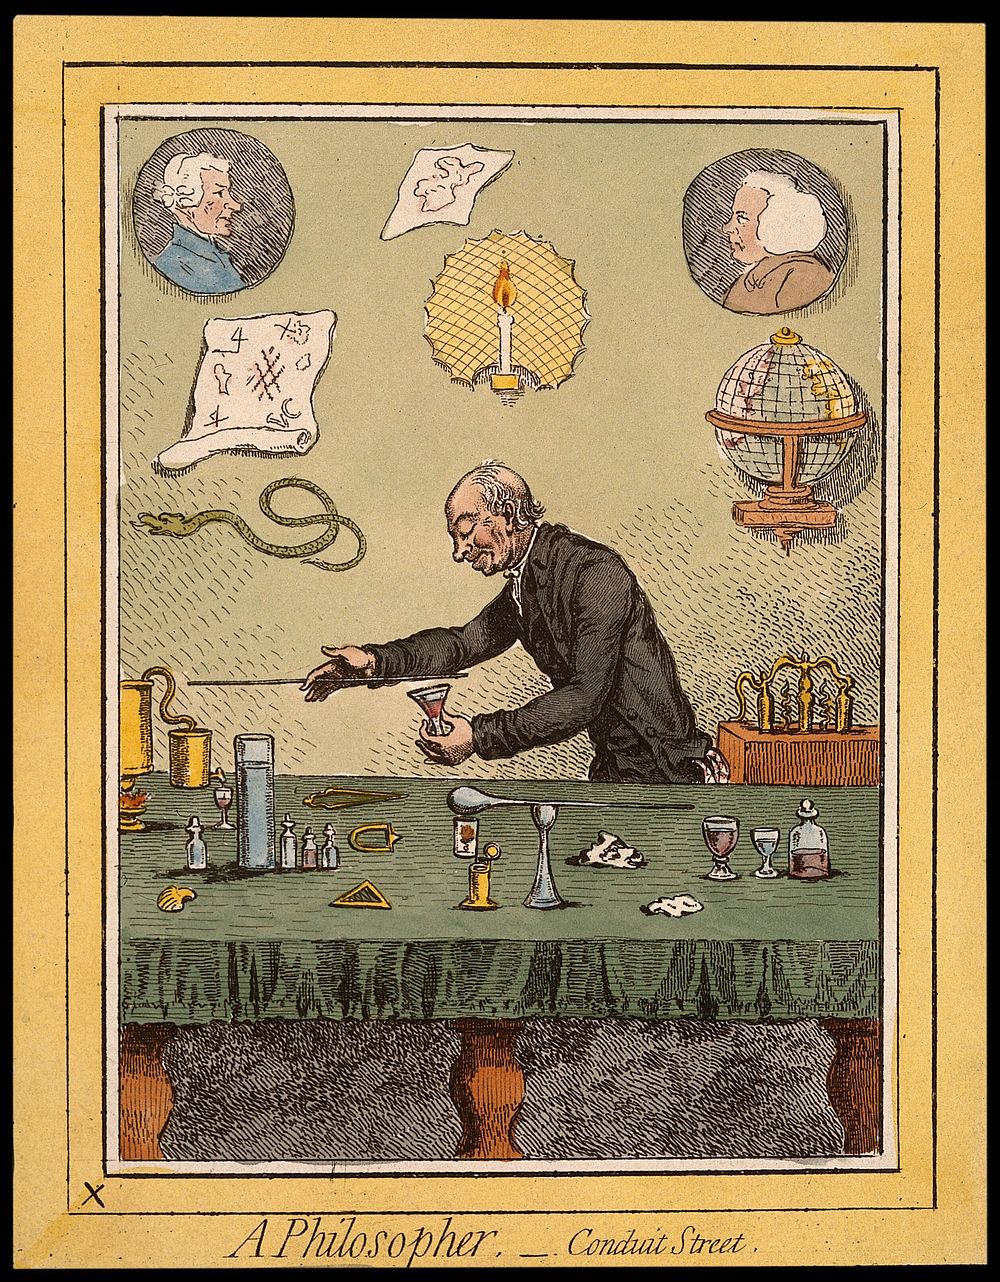 Adam Walker, a natural philosopher, performing scientific experiments. Coloured etching after J. Gillray, 1796.